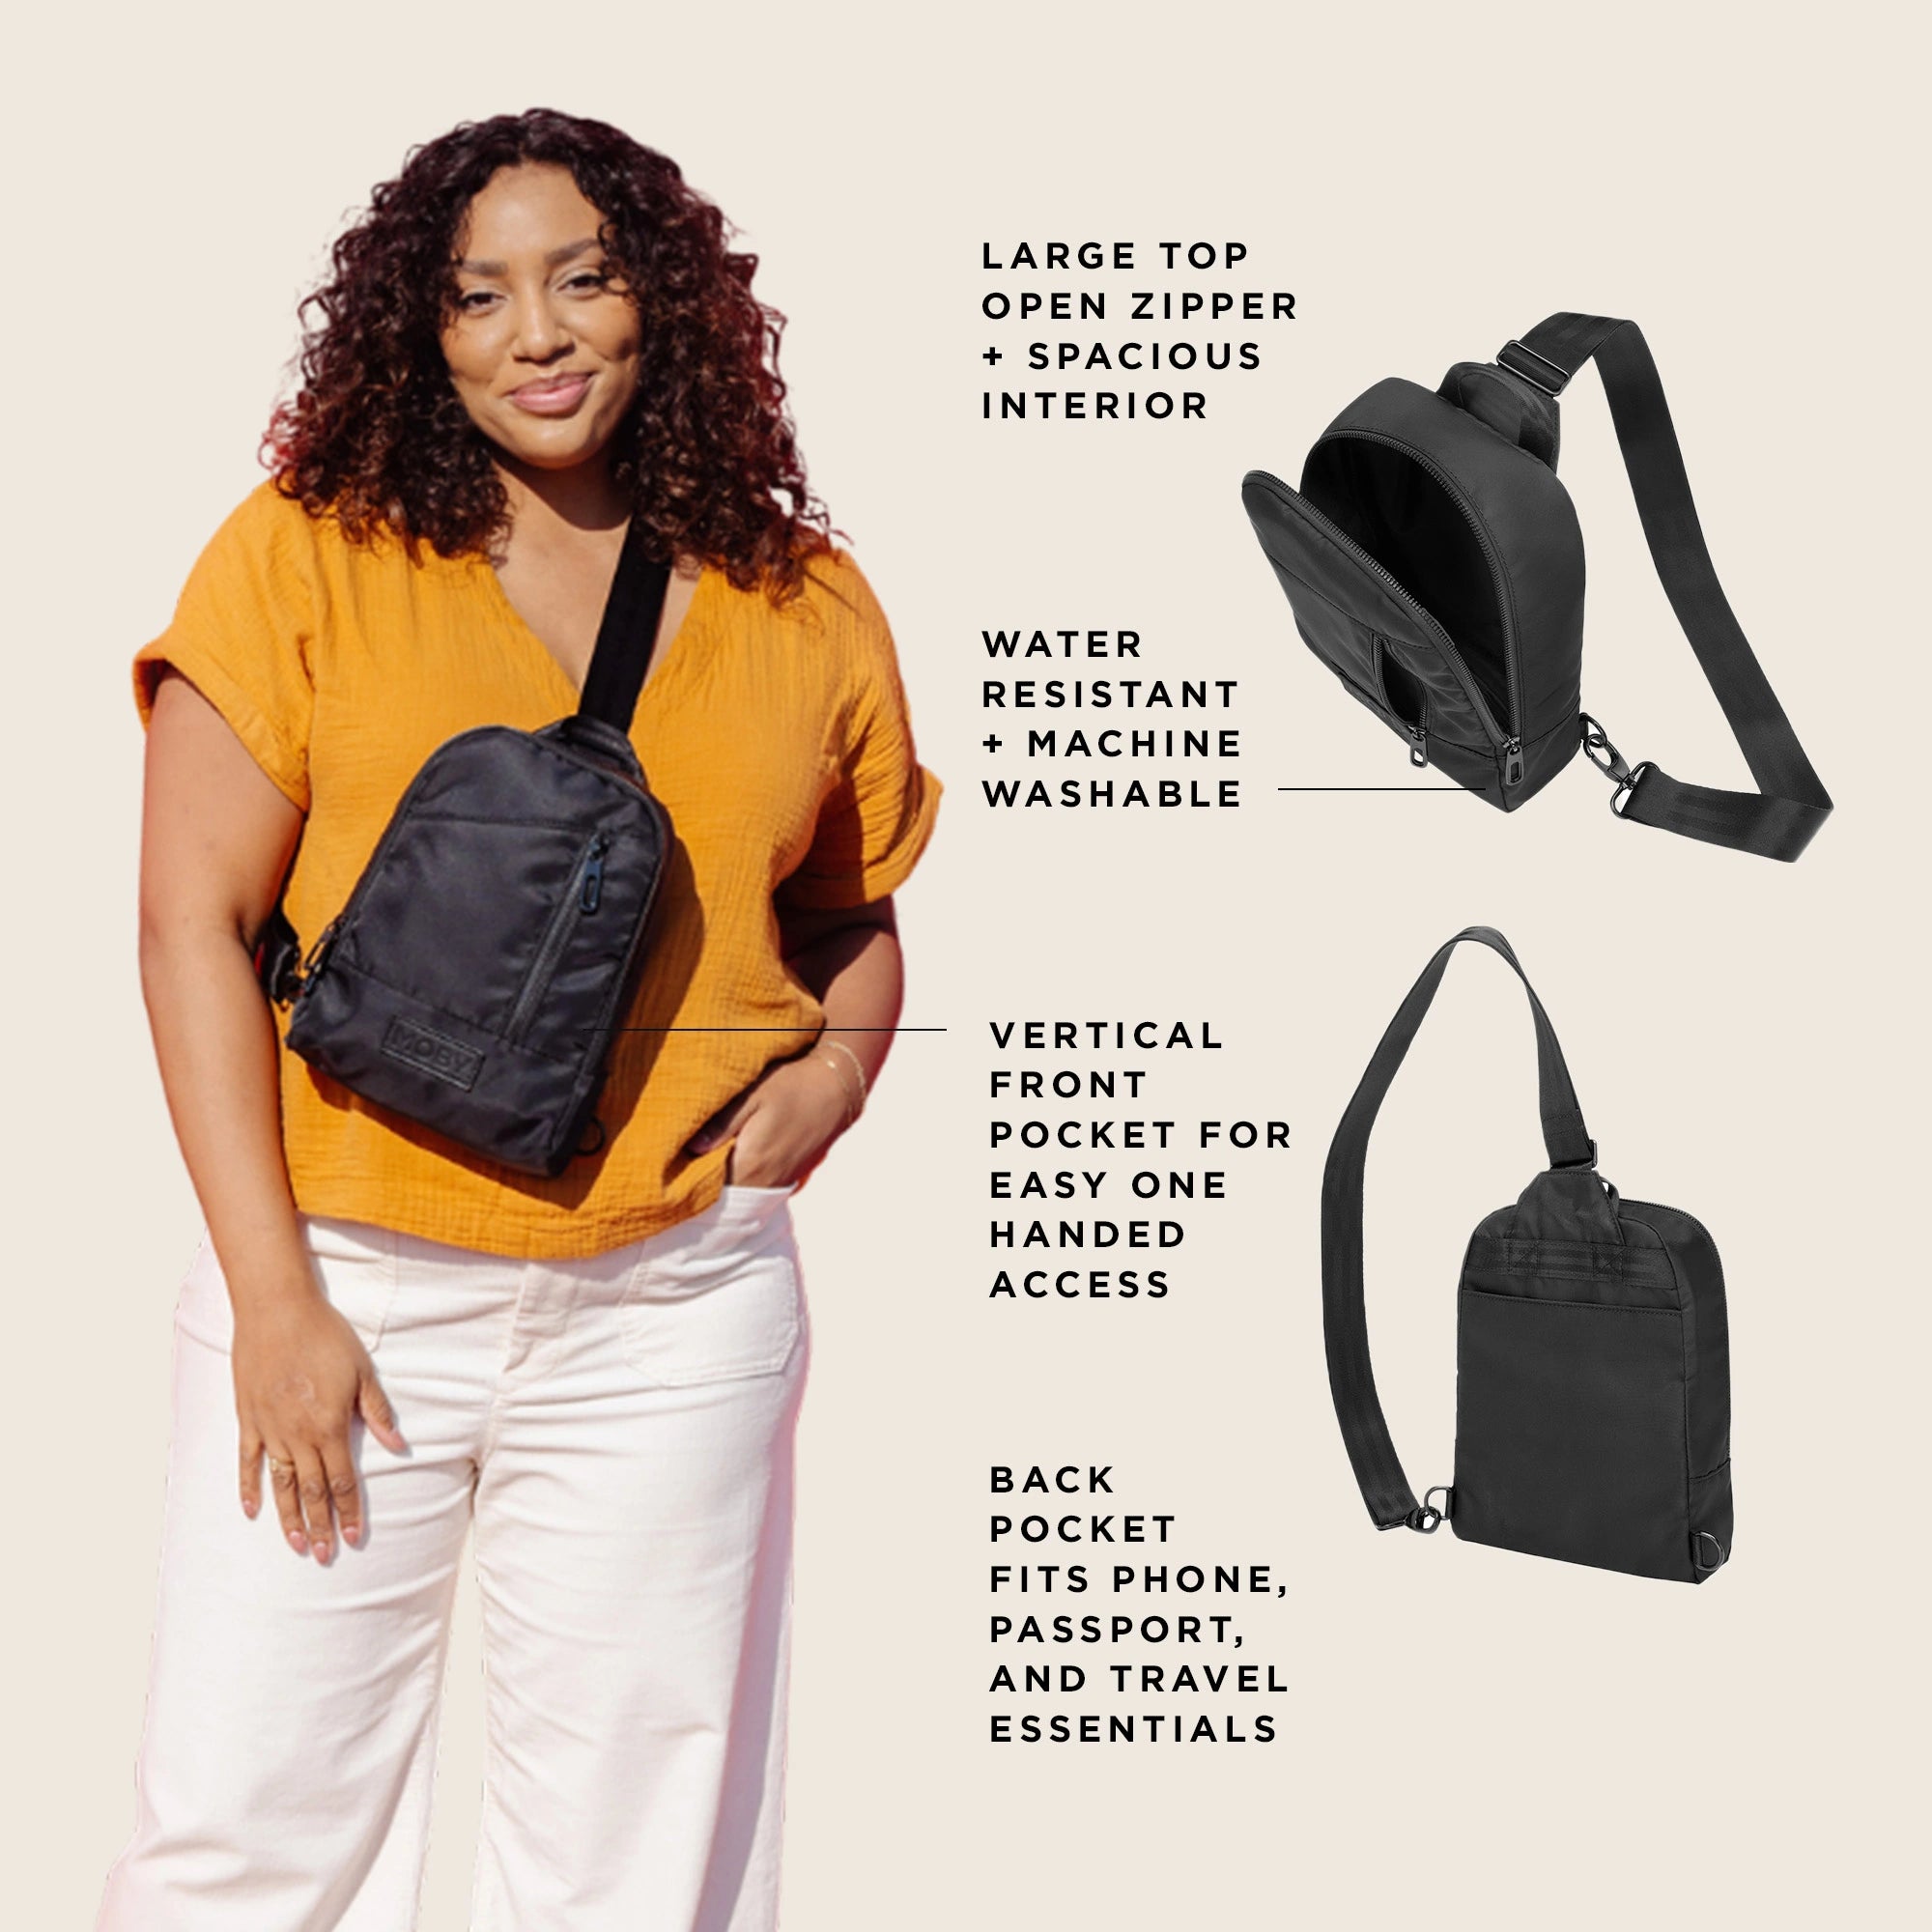 Transit cross body features large top open zipper and spacious interior, water resistant & machine washable fabric, back pocket fits phone, passport and travel essentials